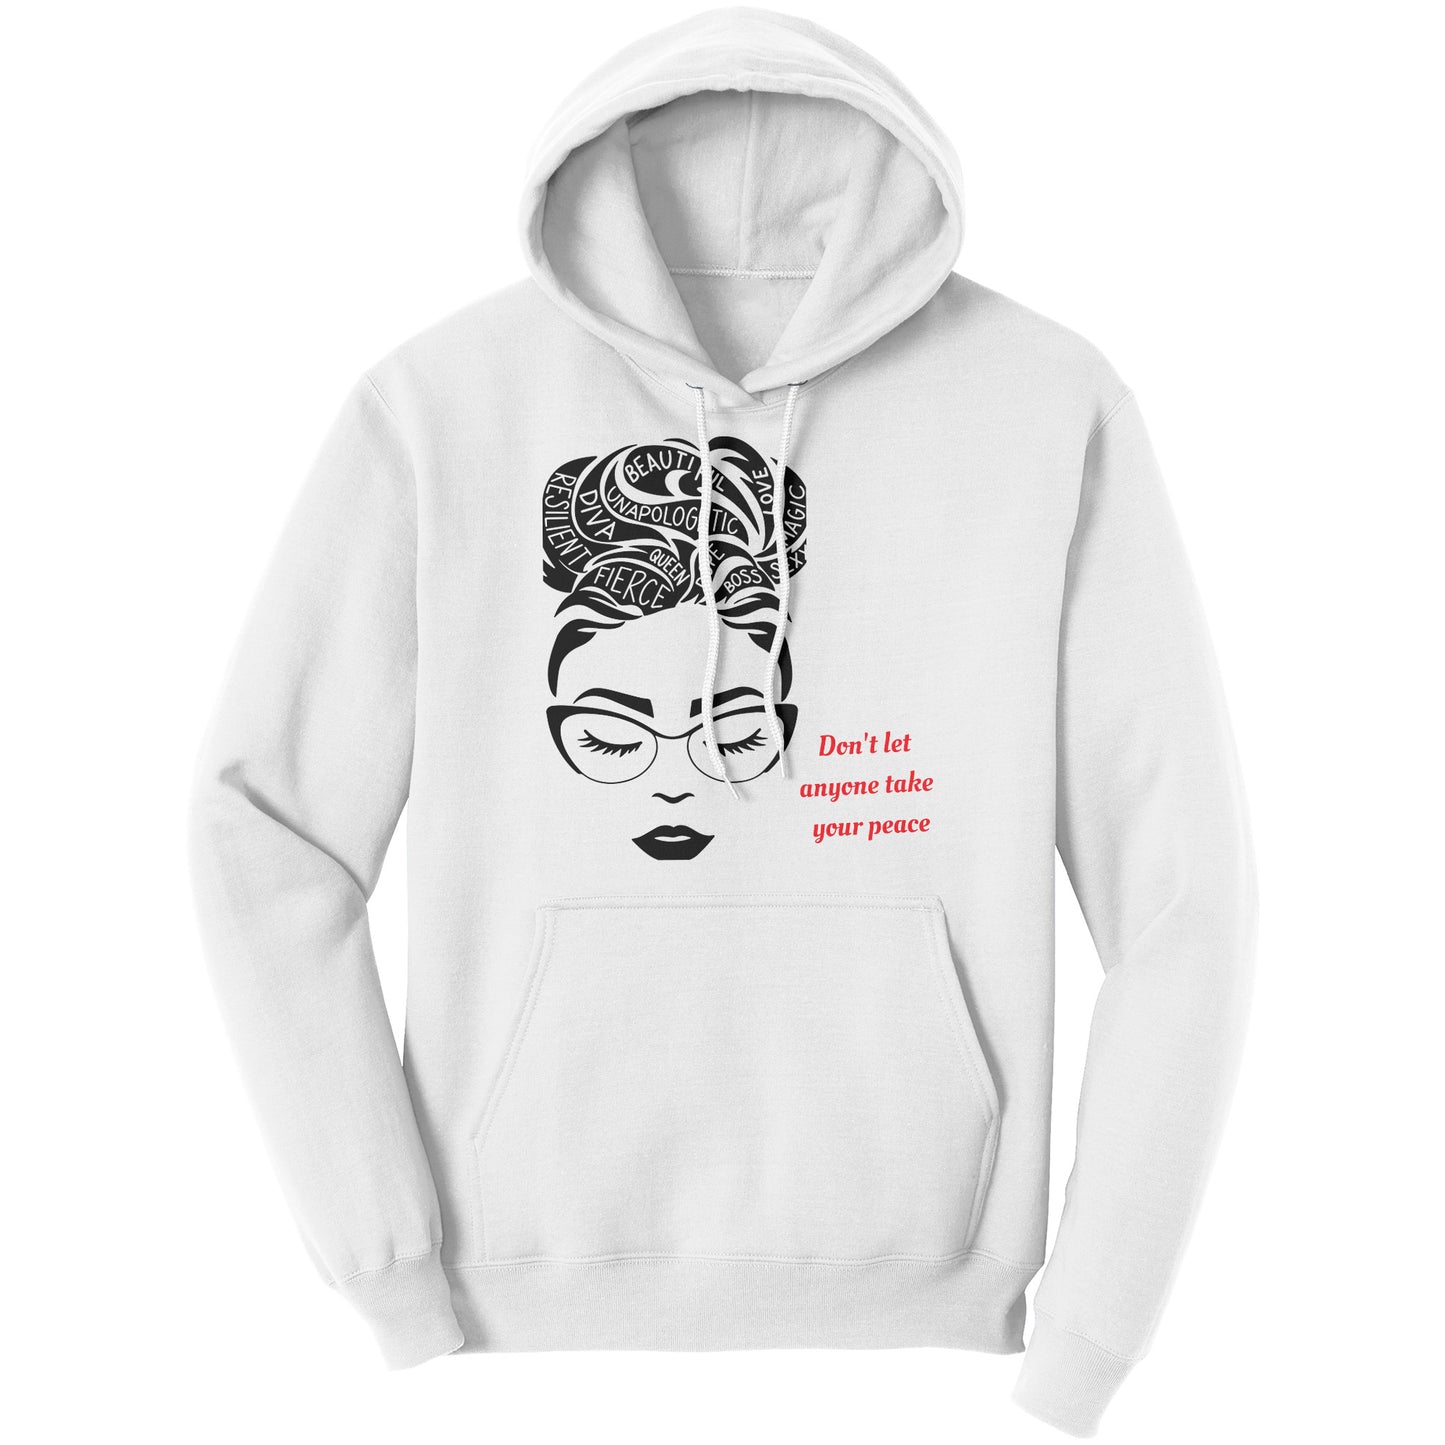 Don't let anyone take my peace hoodie (red lettering)